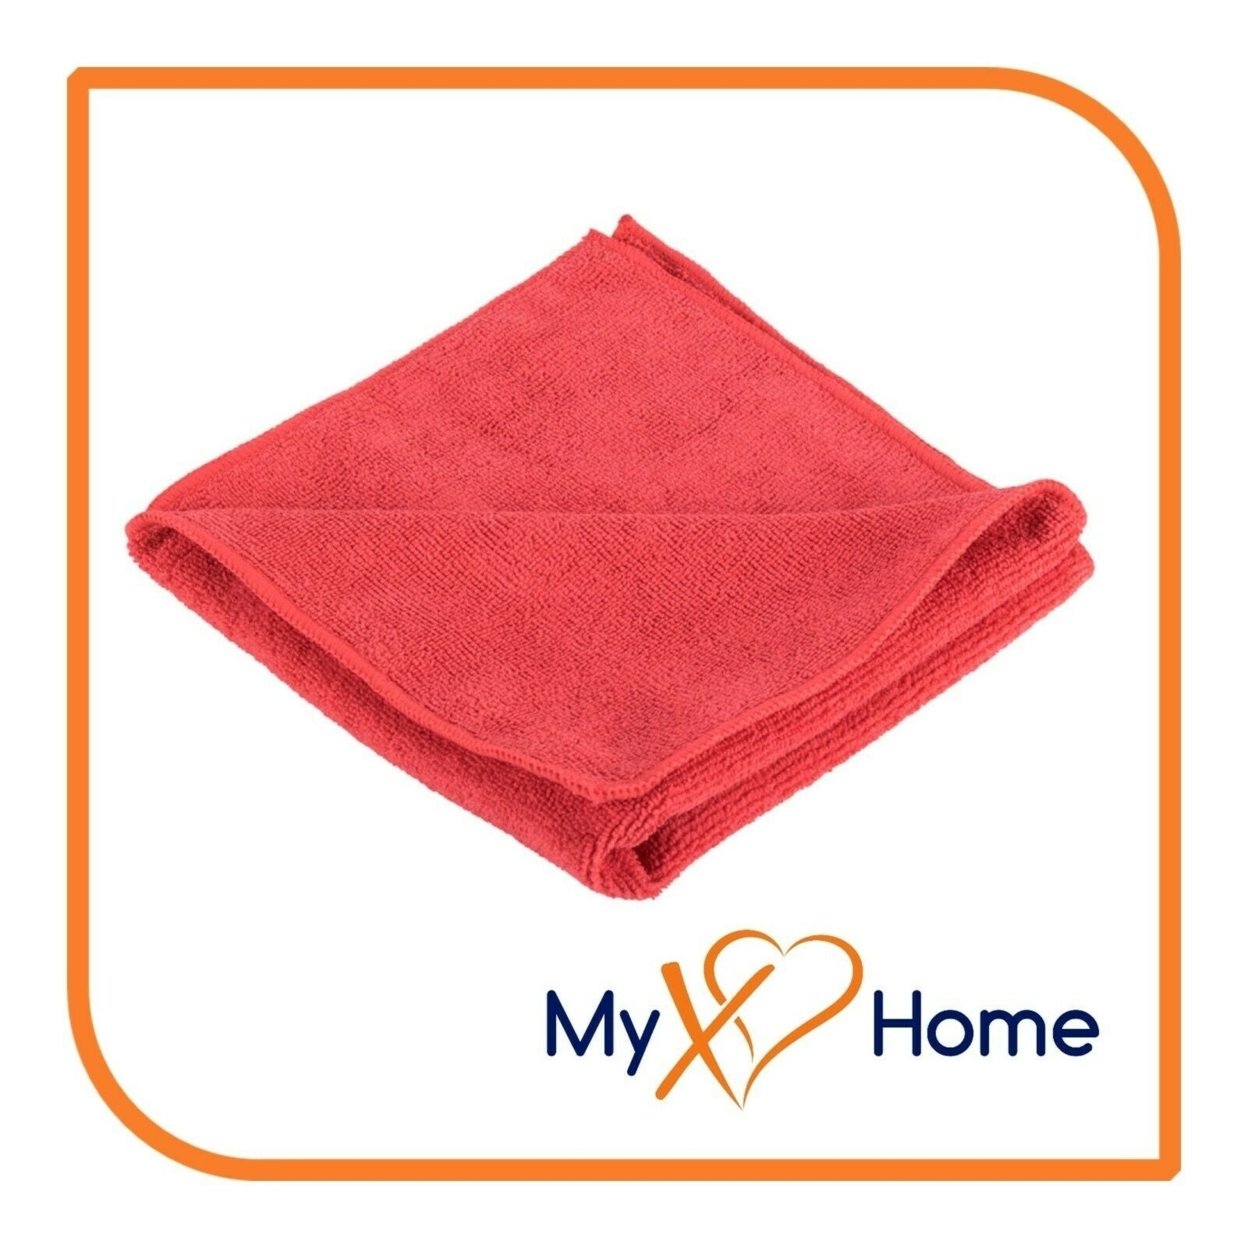 12 x 12 Red Microfiber Towel by MyXOHome - j) 120 Towels, XOH-CLE-TOW-MIC-1225x120